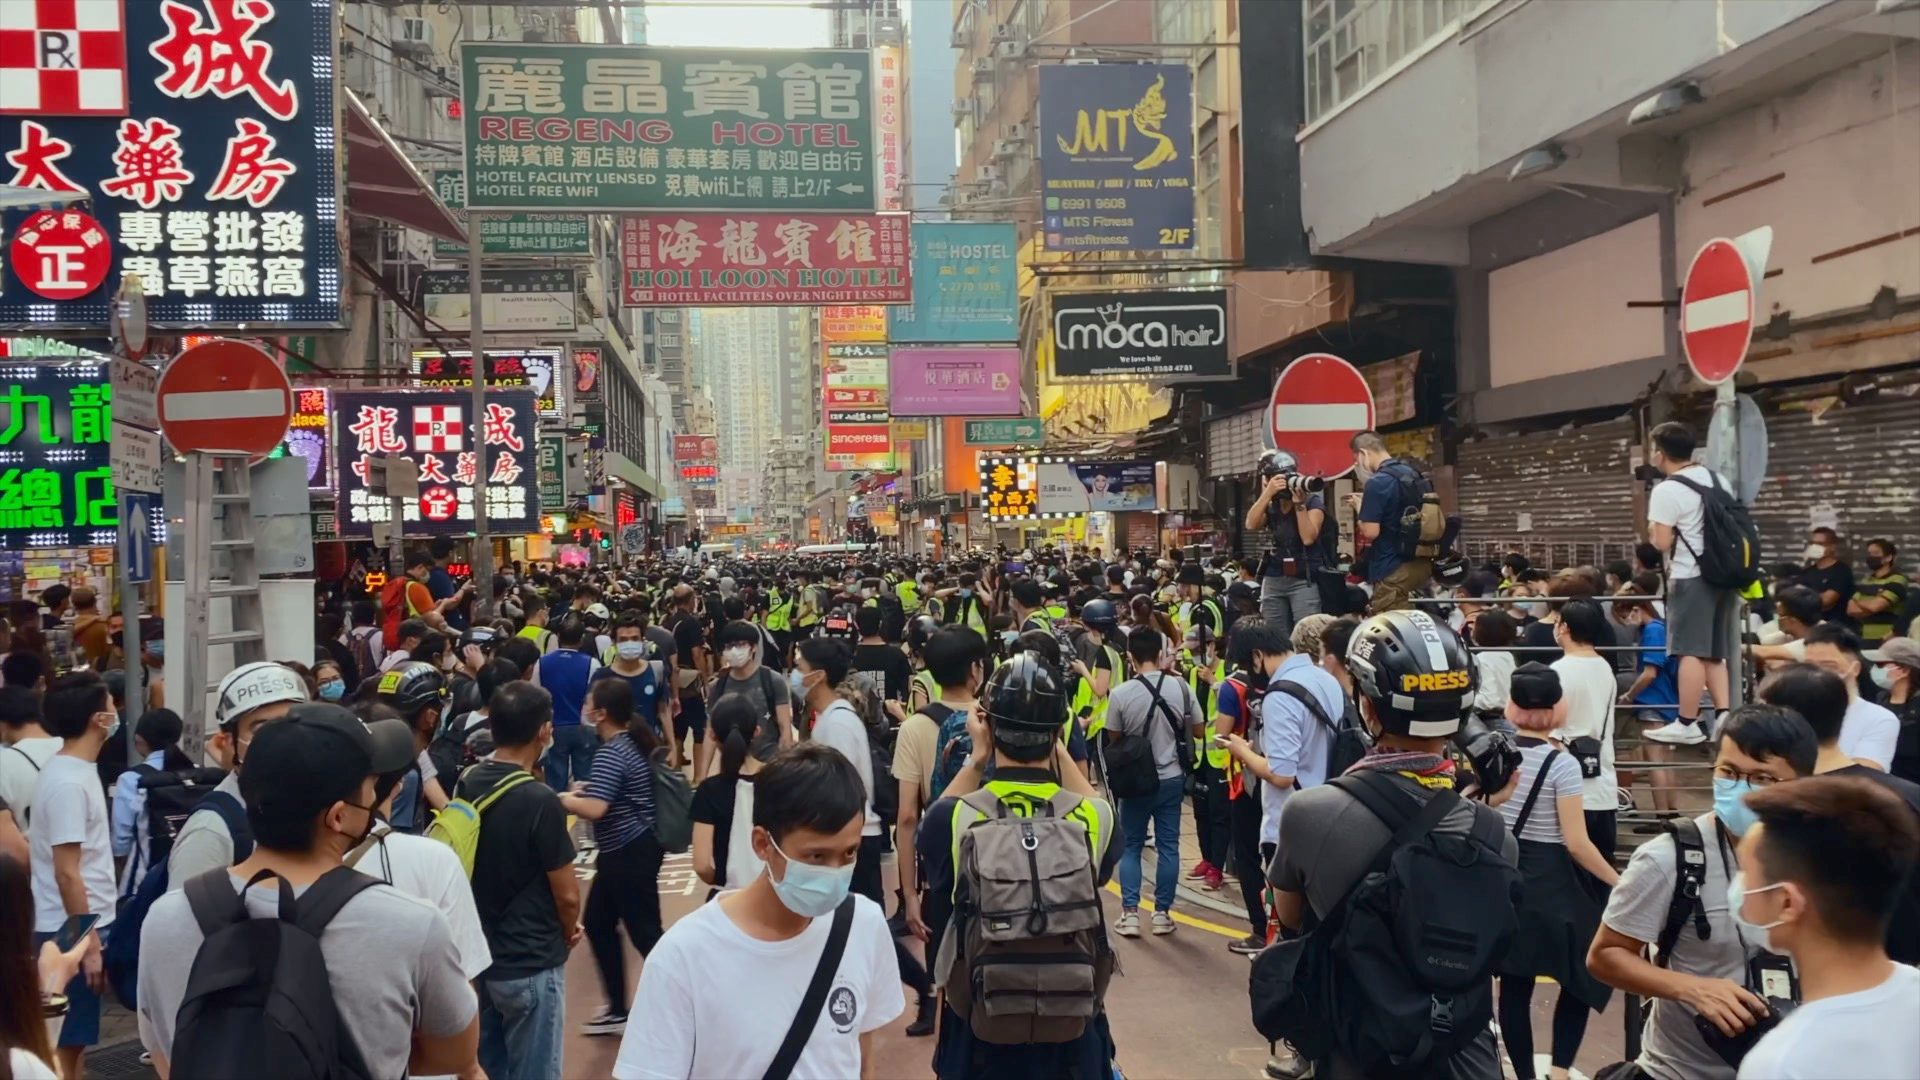 WATCH: Day of discontent in Hong Kong